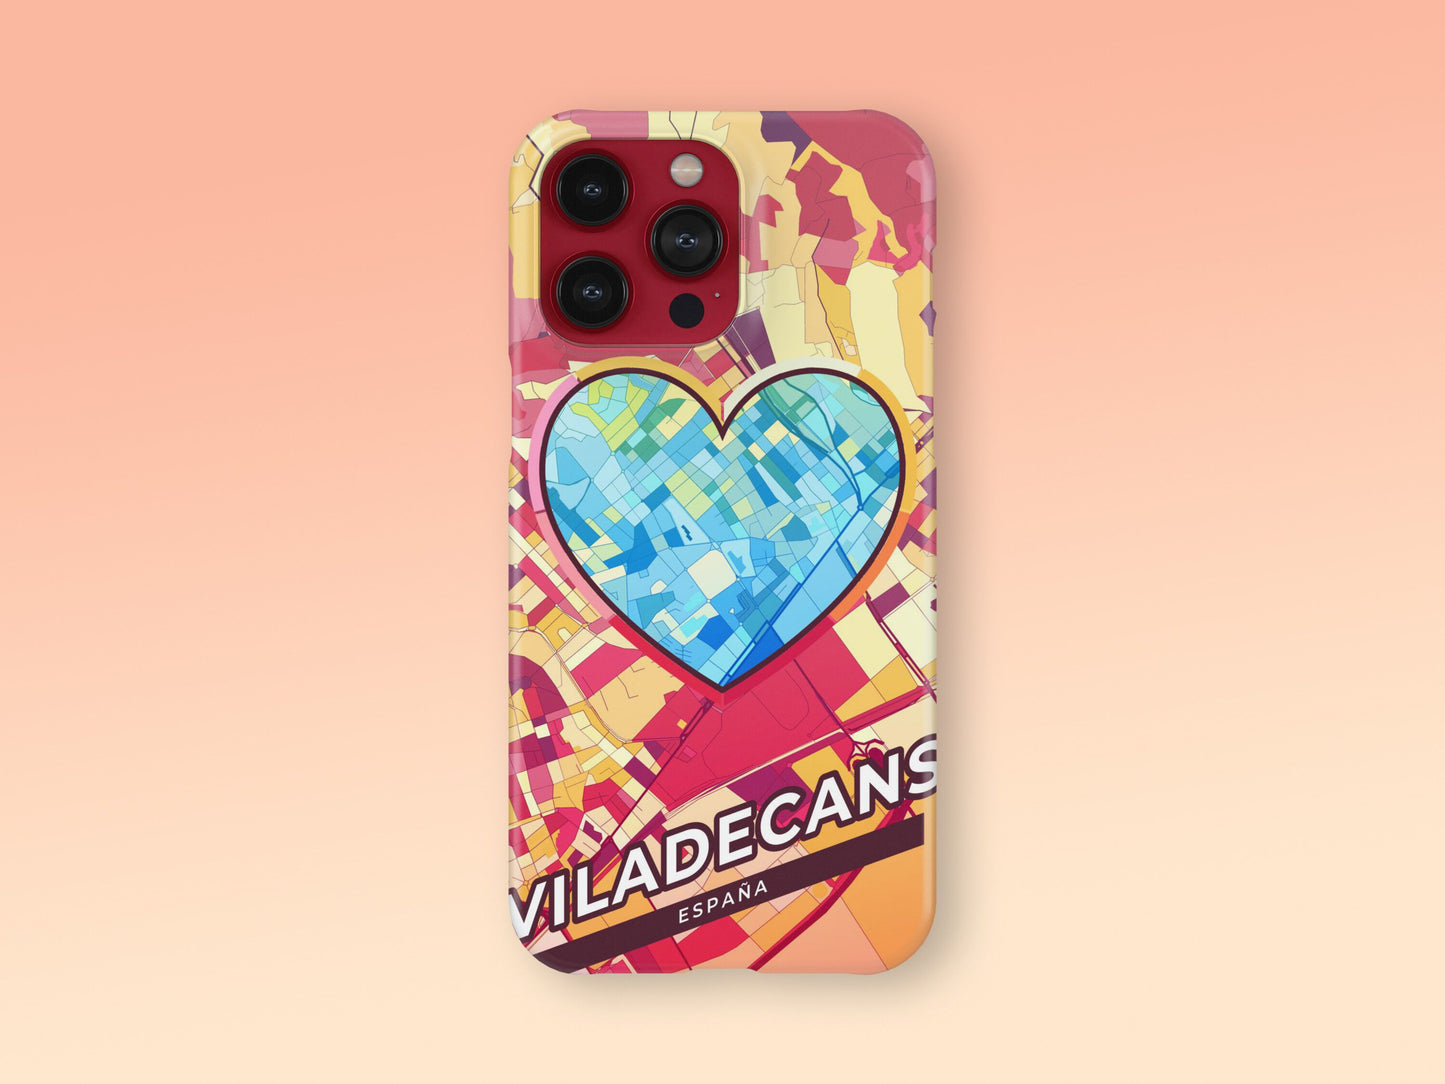 Viladecans Spain slim phone case with colorful icon 2